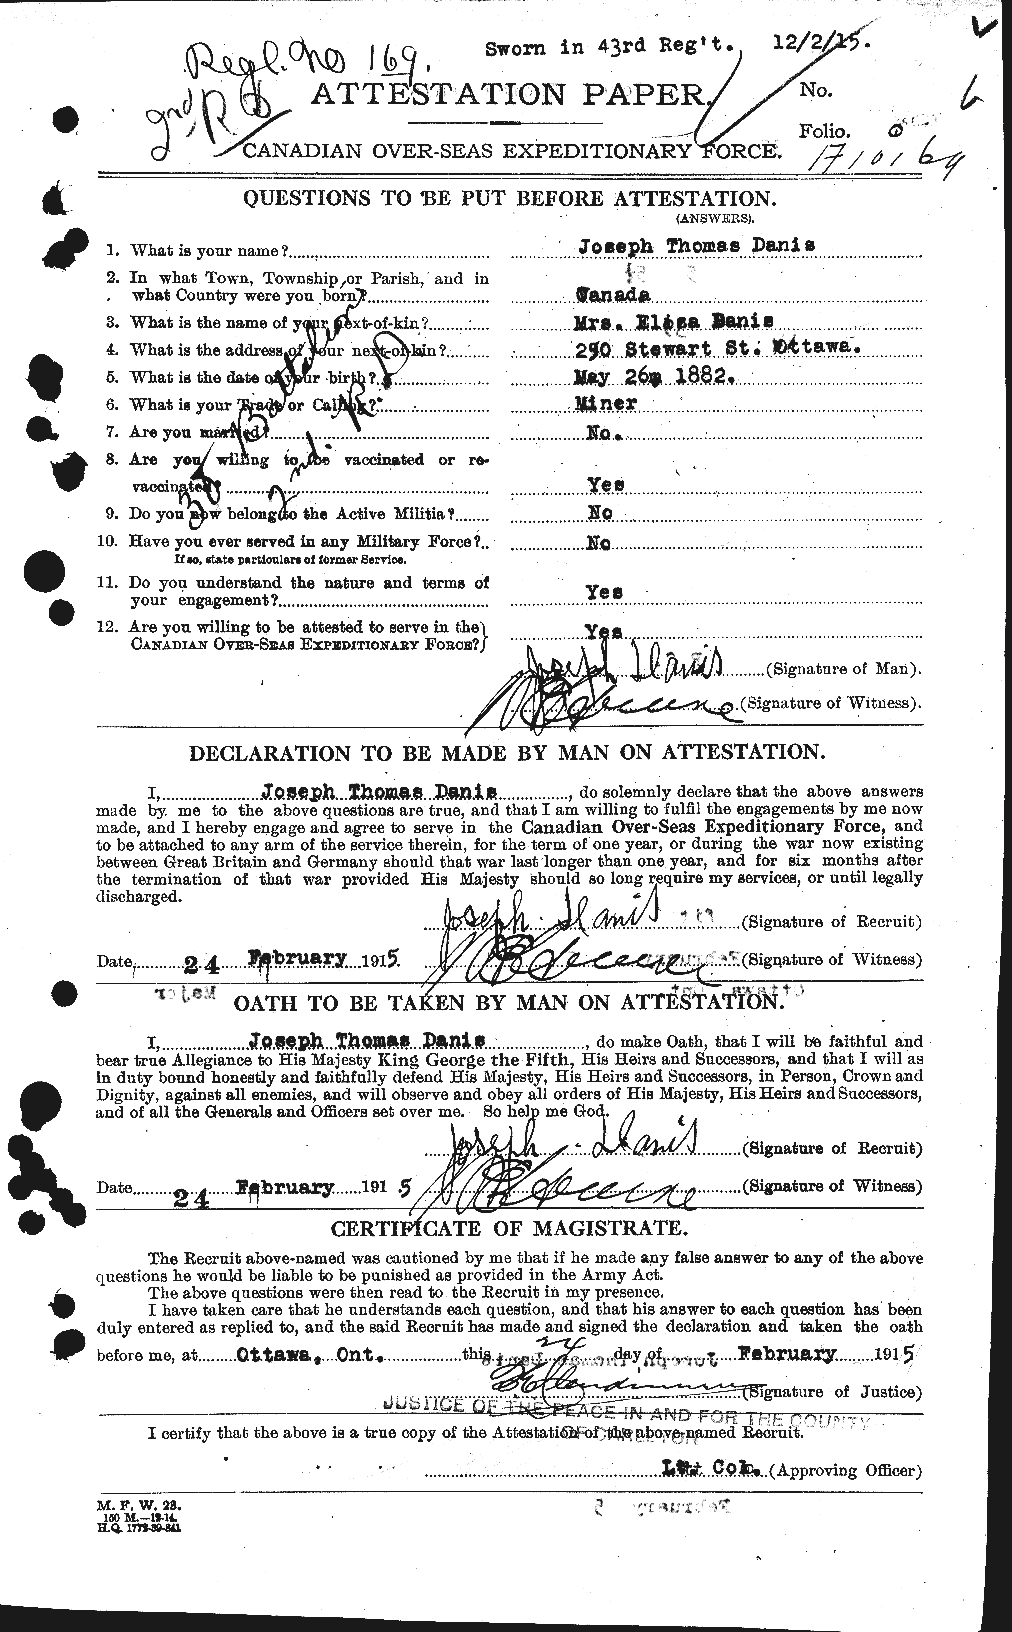 Personnel Records of the First World War - CEF 279755a